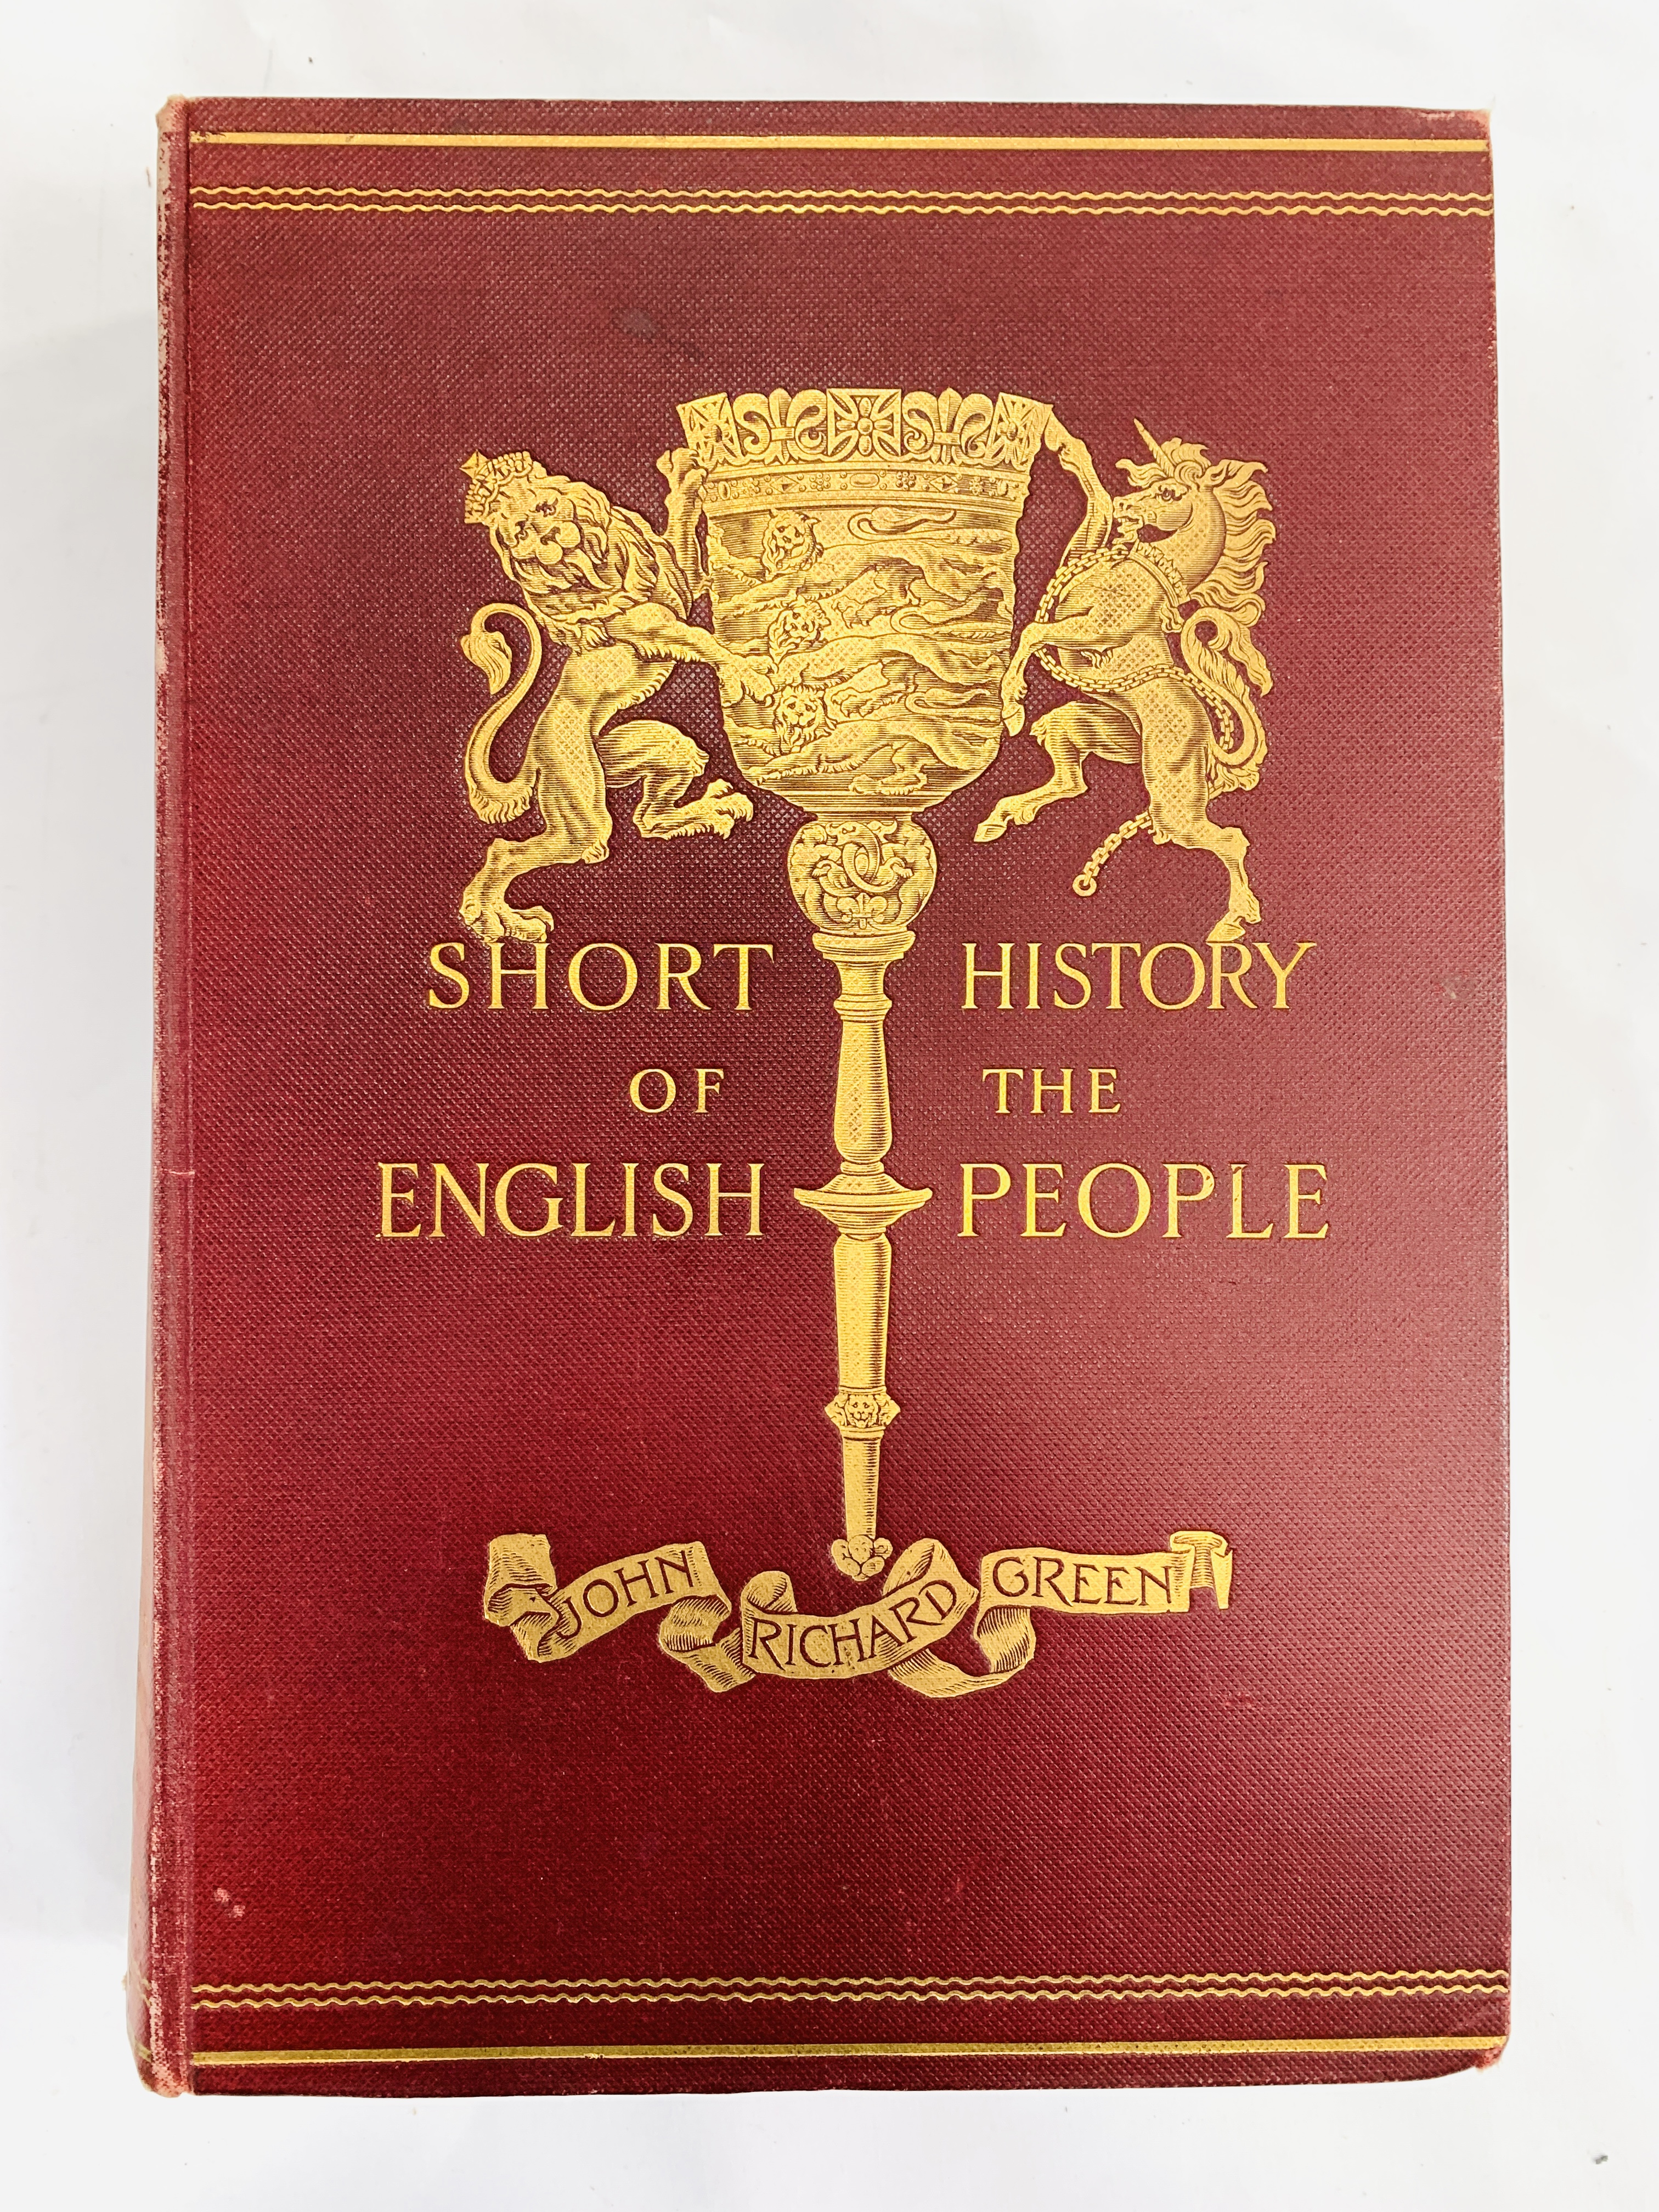 A Short History of the English People by J R Green, published 1893 - Image 2 of 4